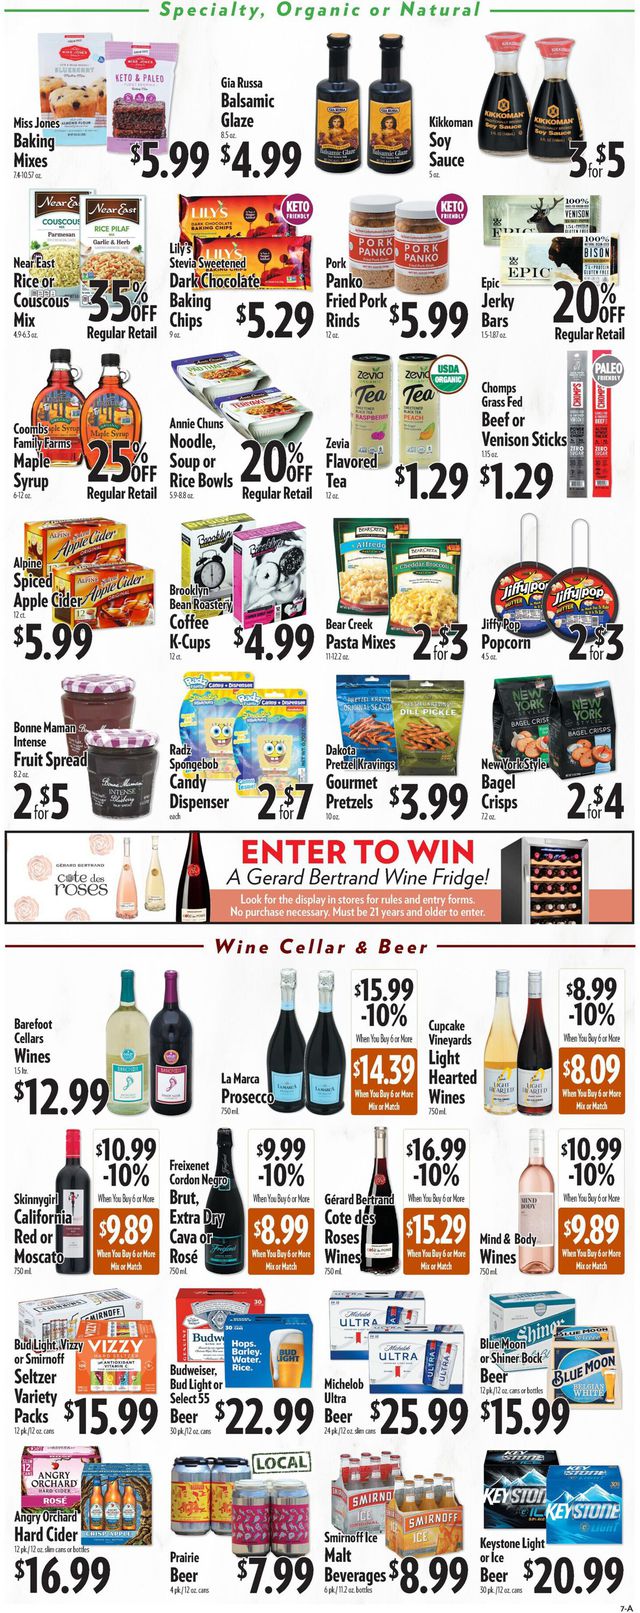 Reasor's Ad from 01/20/2021